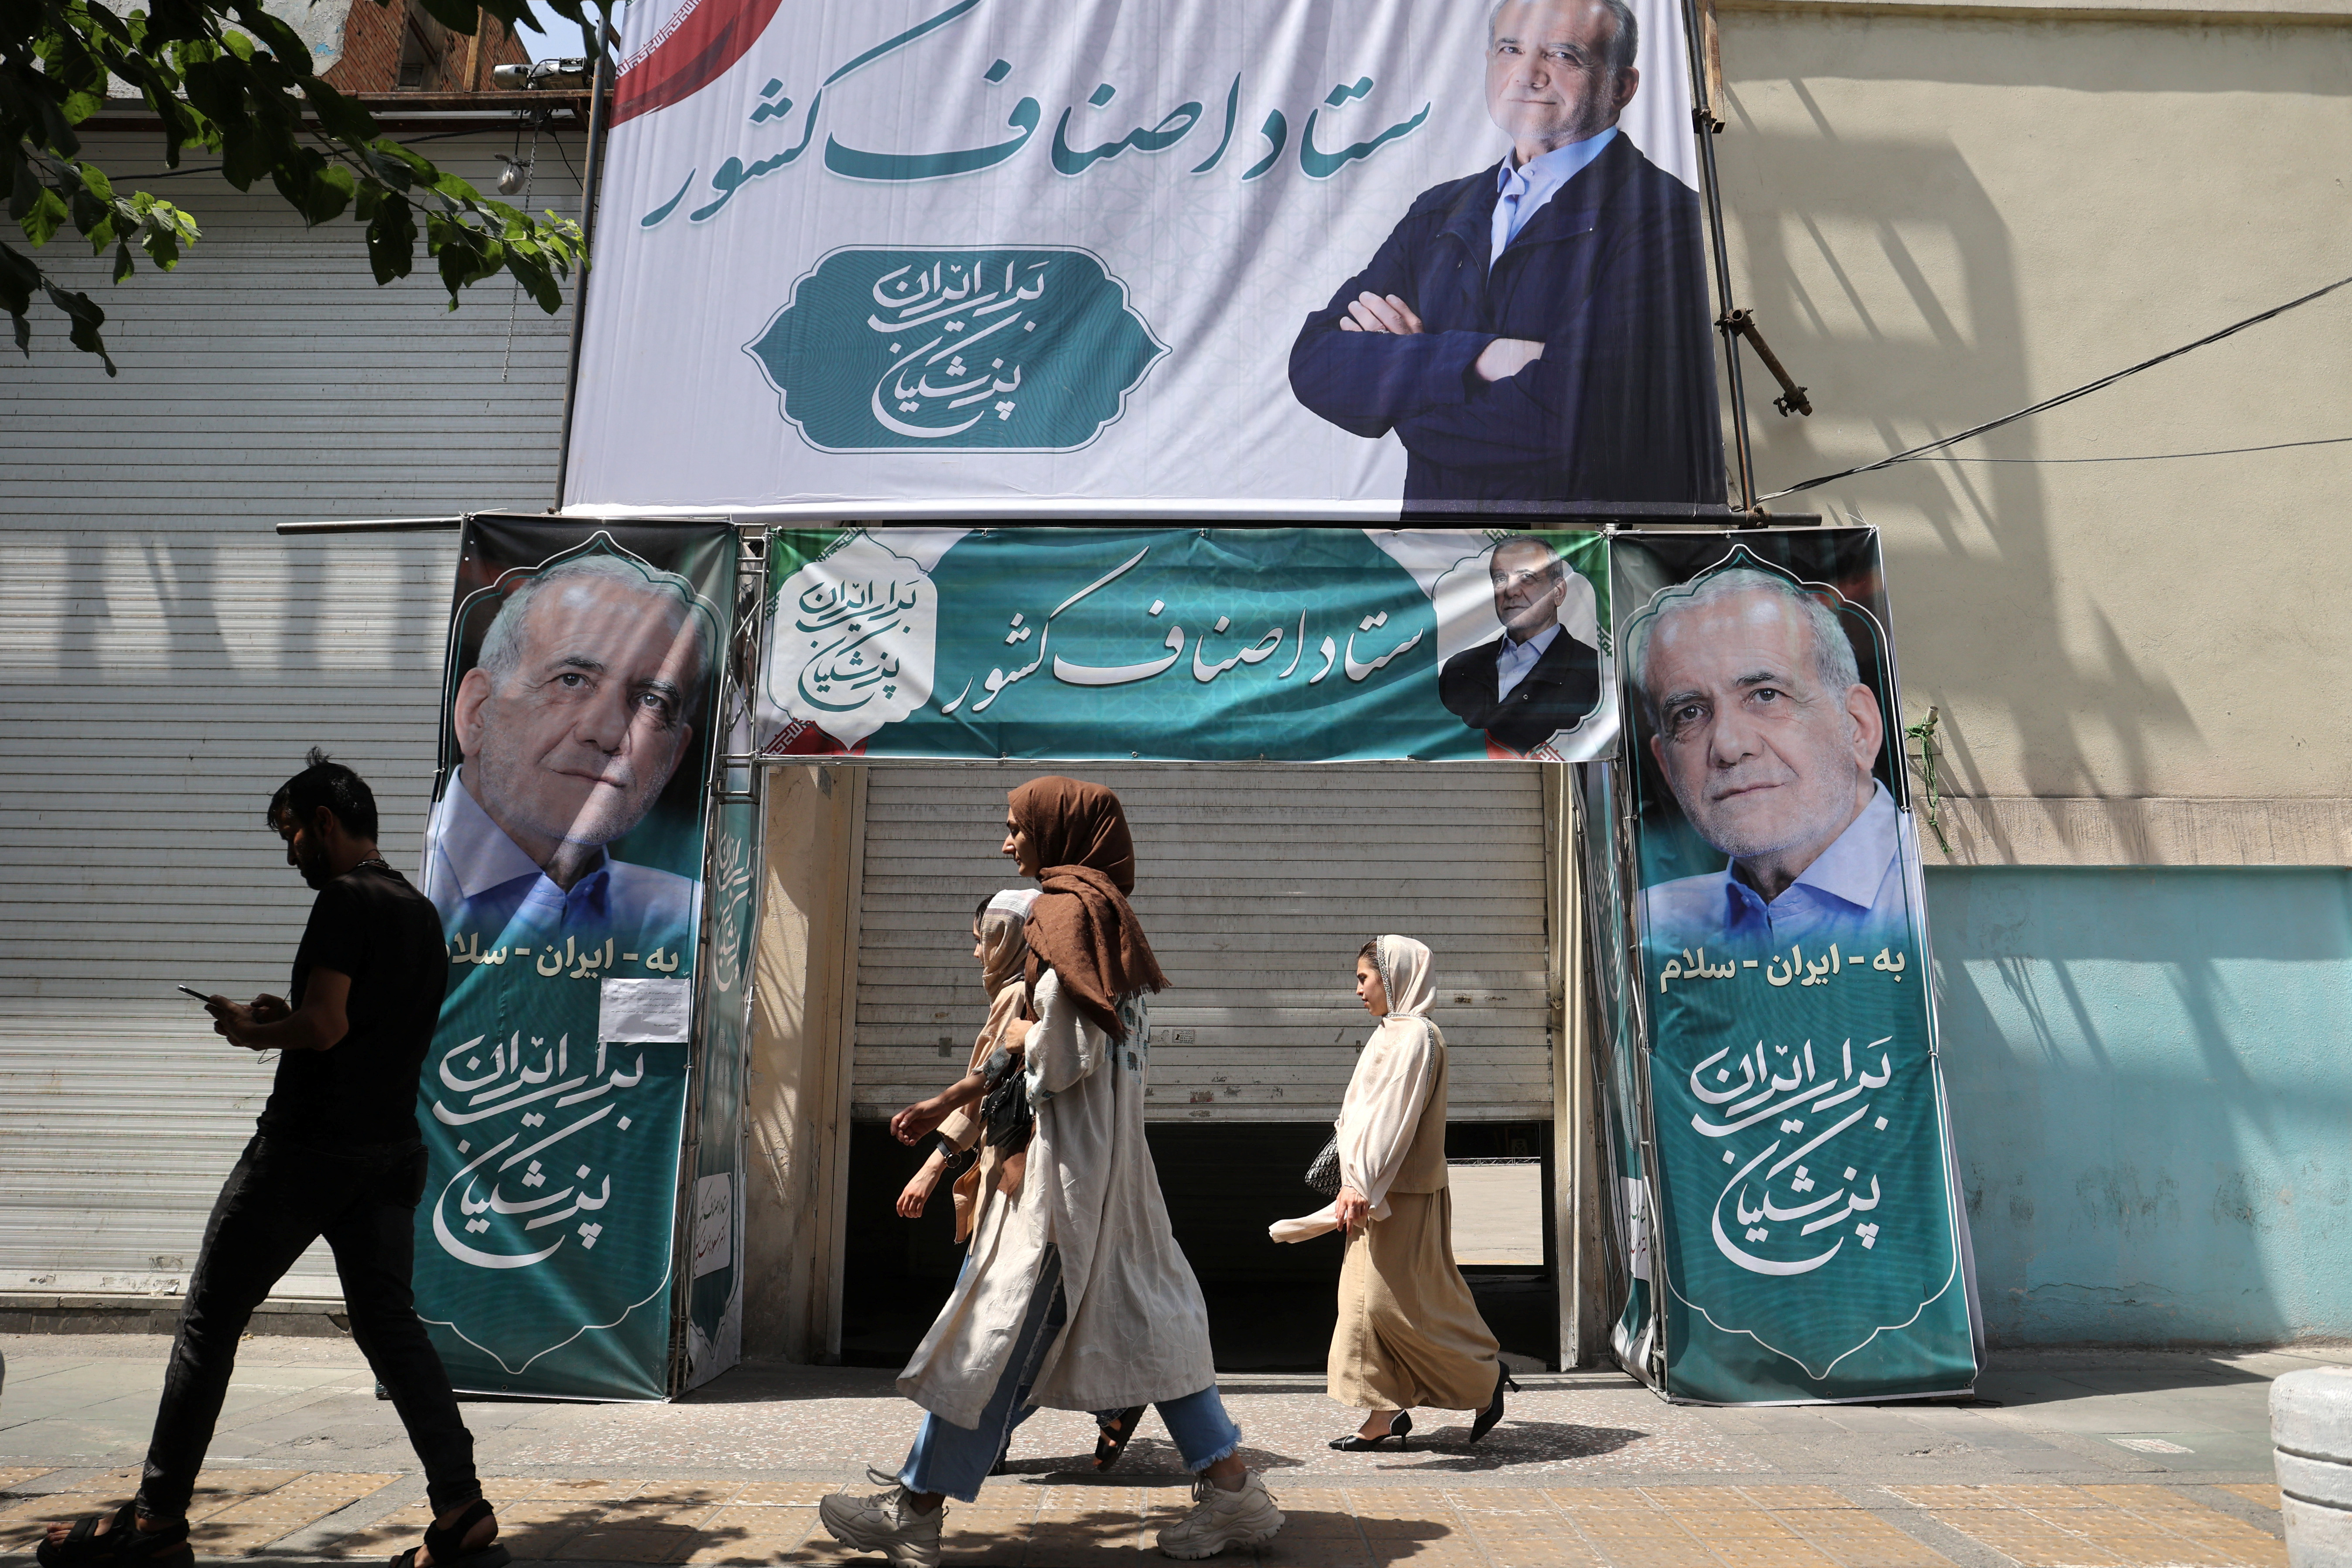 A banner featuring presidential candidate Masoud Pezeshkian is displayed on a street in Tehran